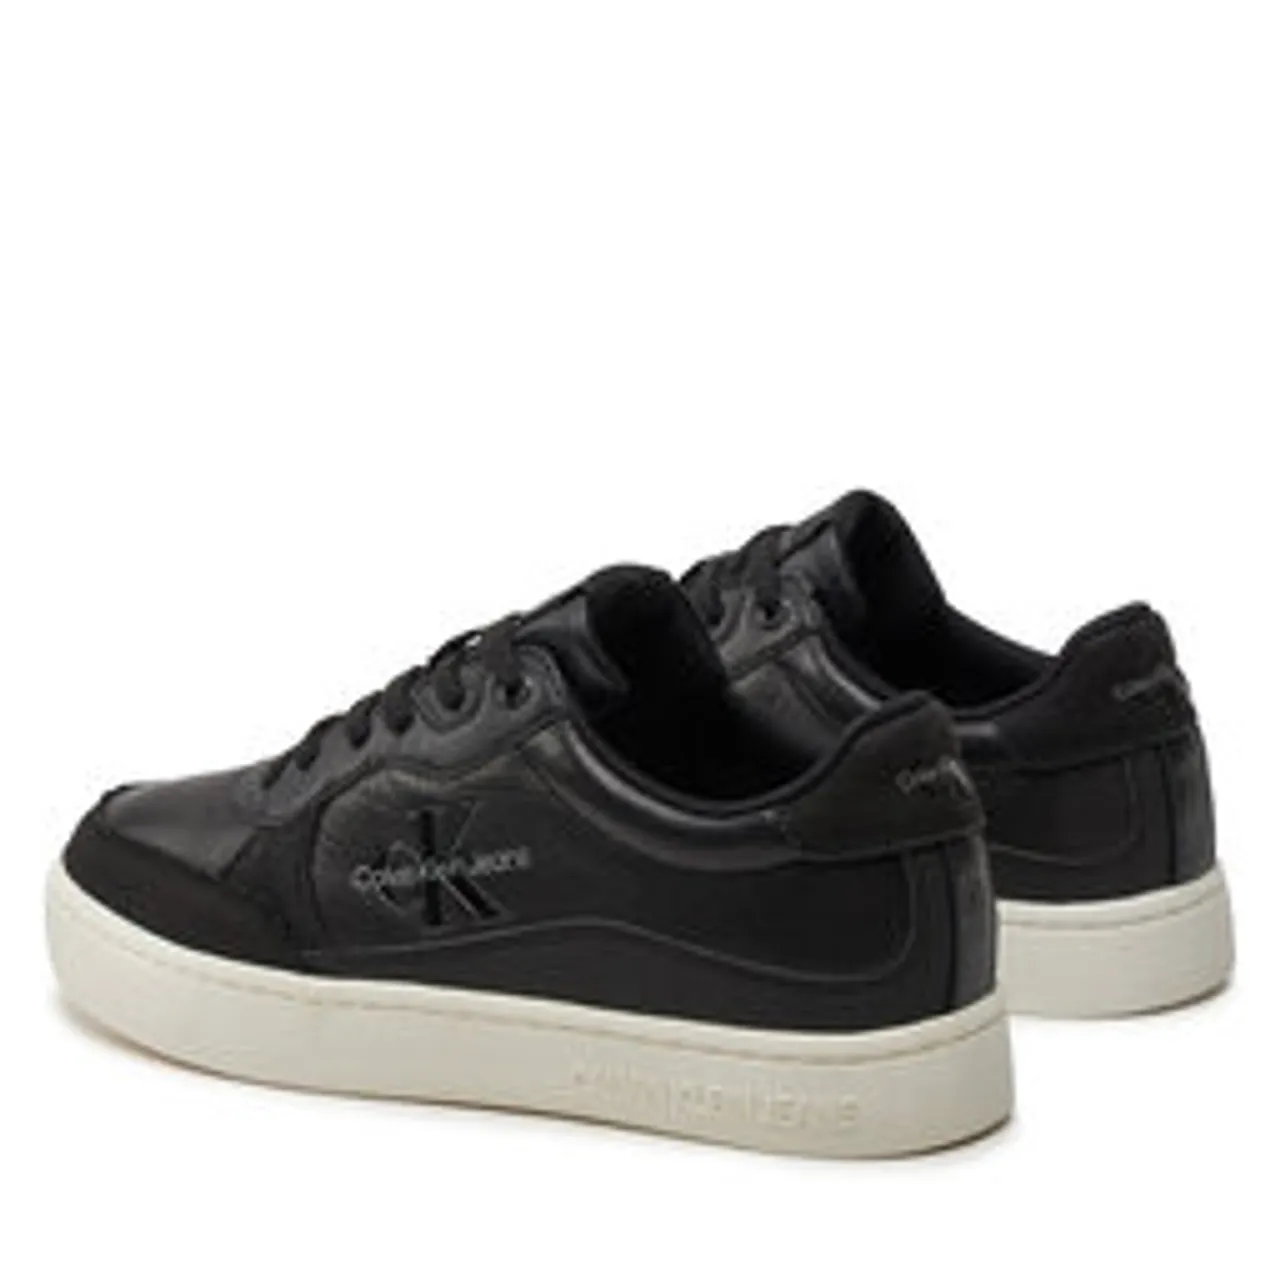 Sneakers Calvin Klein Jeans Classic Cupsole Low Lth Ml Fad YM0YM00885 Black/Bright White 0GM